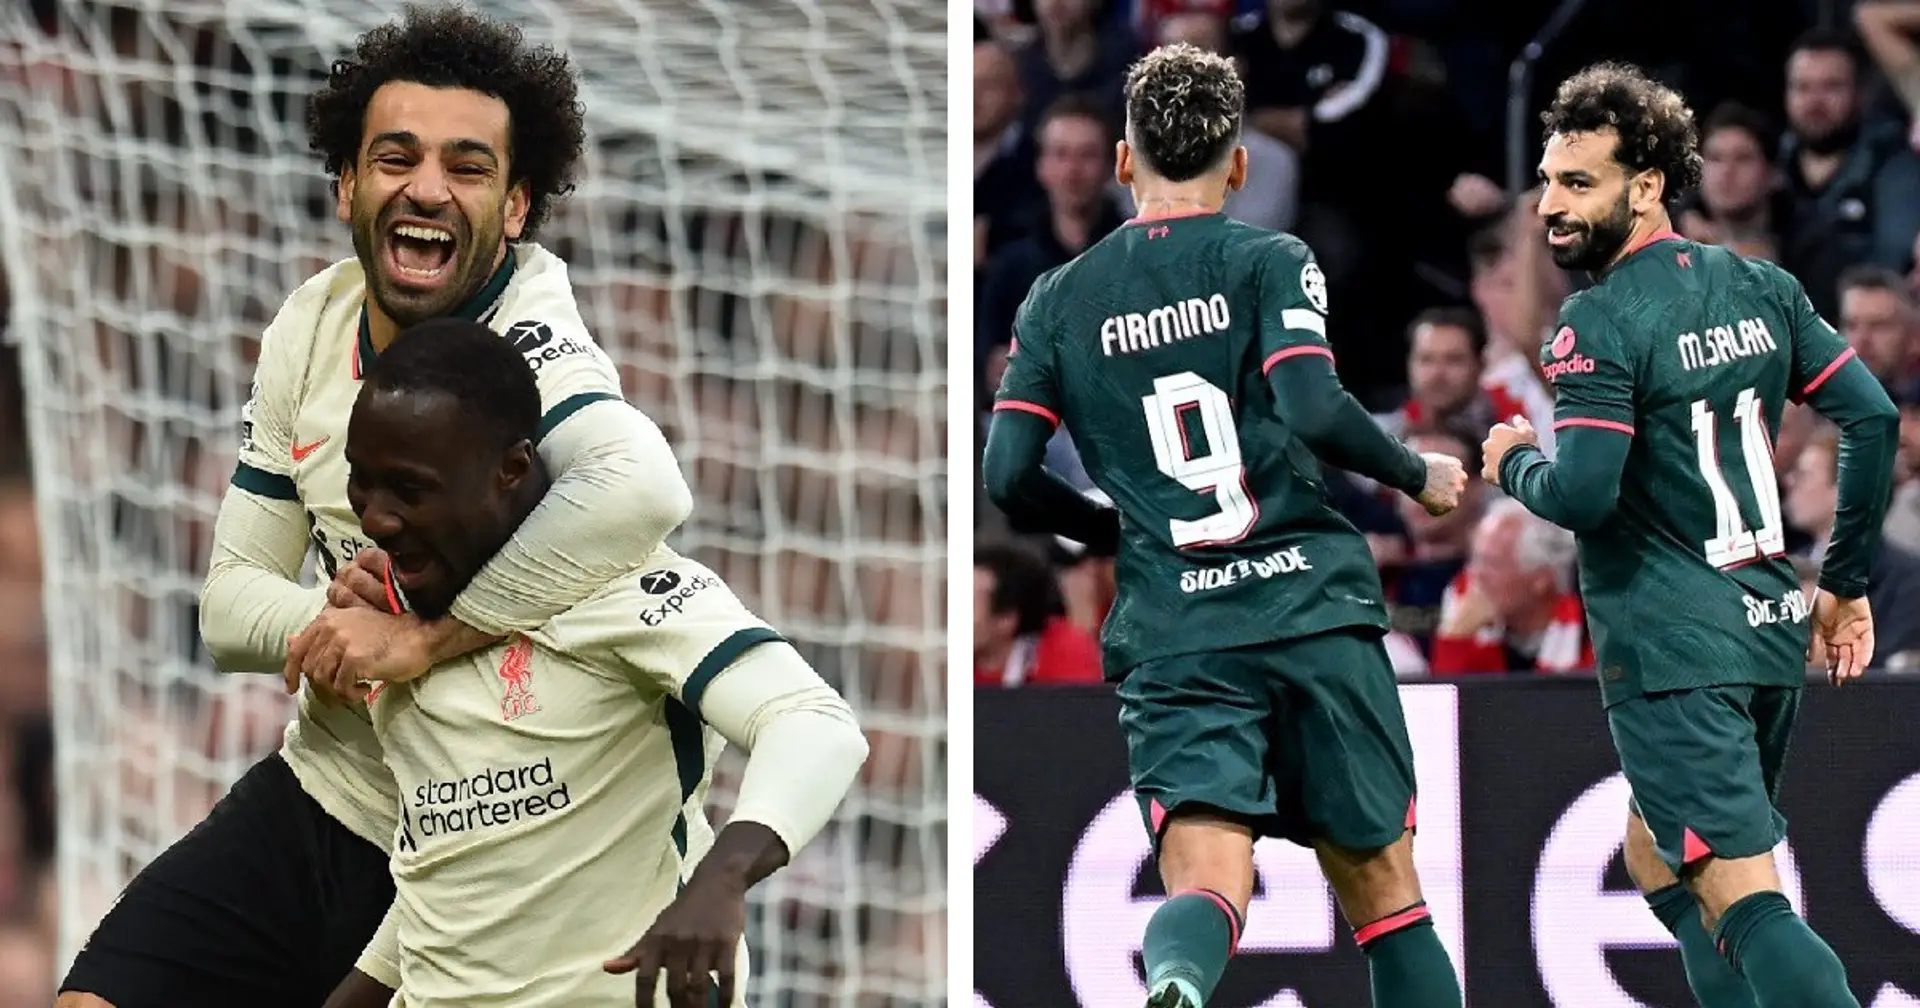 'I hope our paths will cross again': Salah posts farewell message for Firmino and other departing Reds